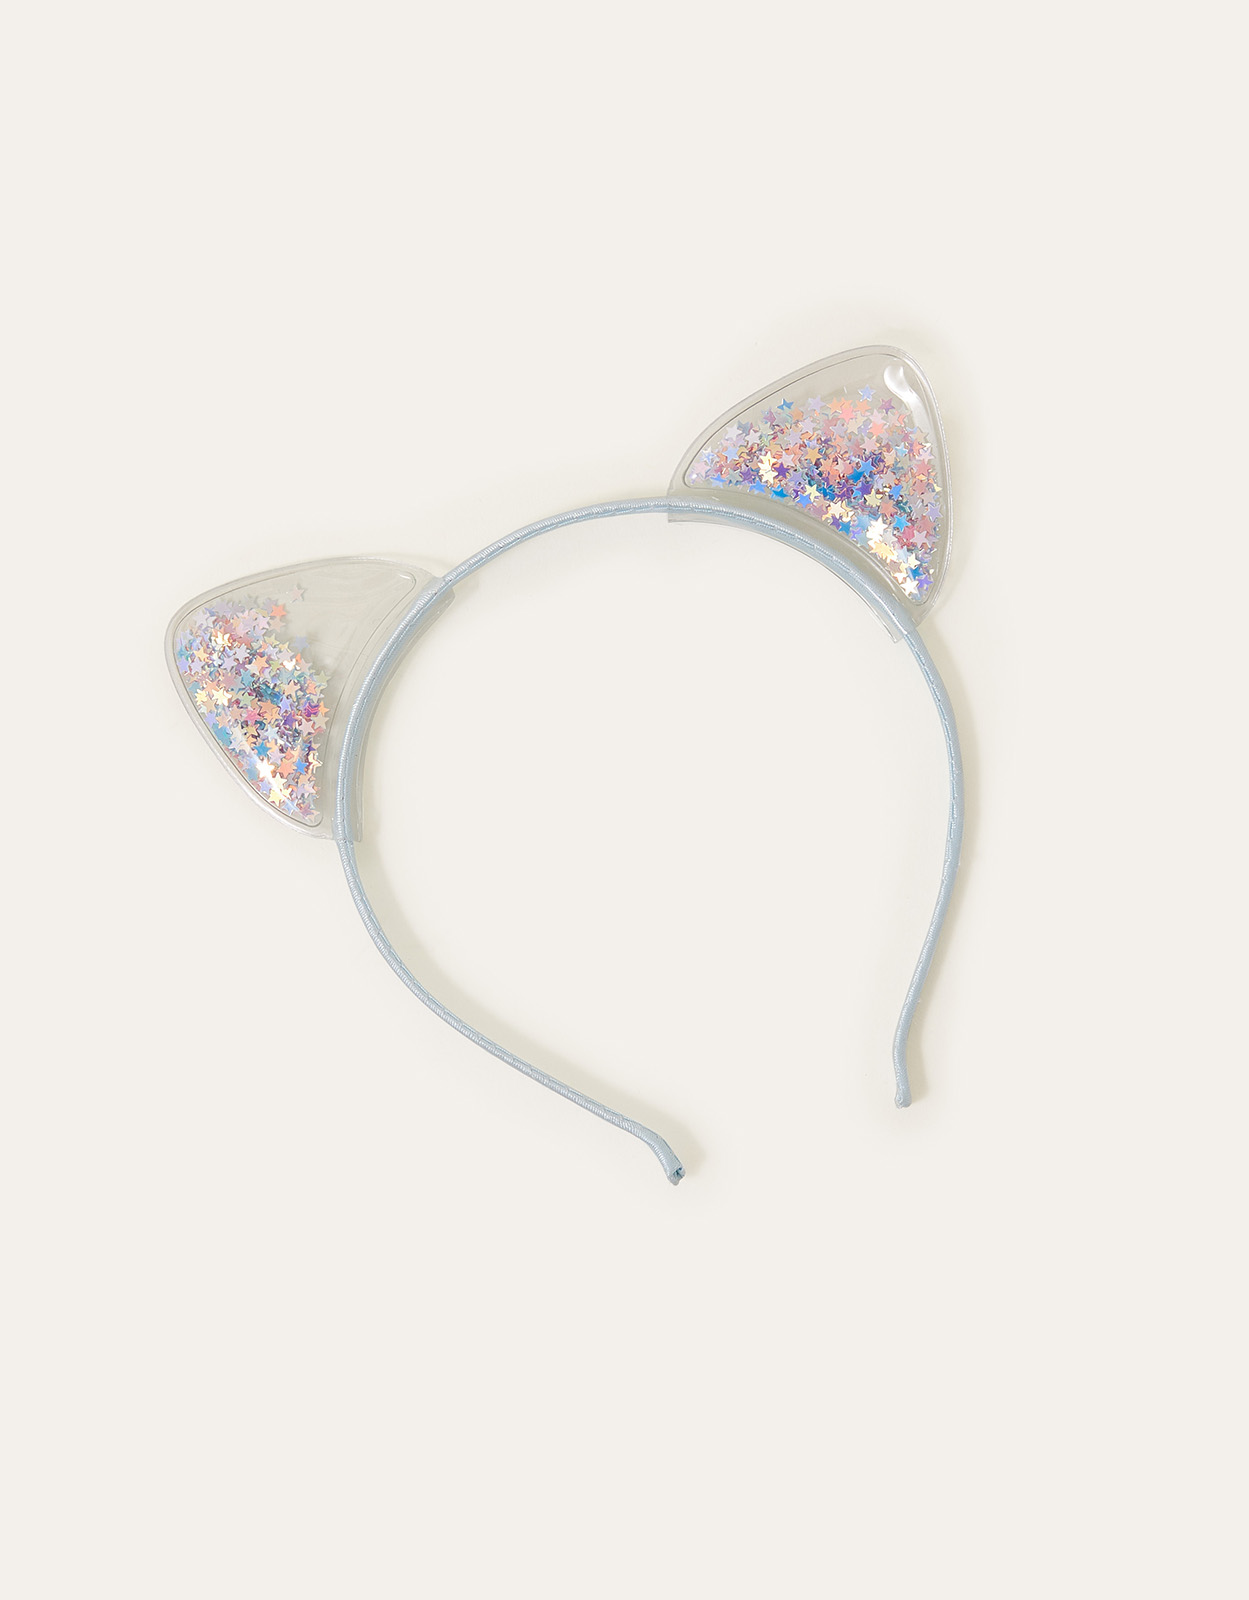 Accessorize Girl's Blue/Pink Shake Sequin Cat Ear Headband, Size: One Size